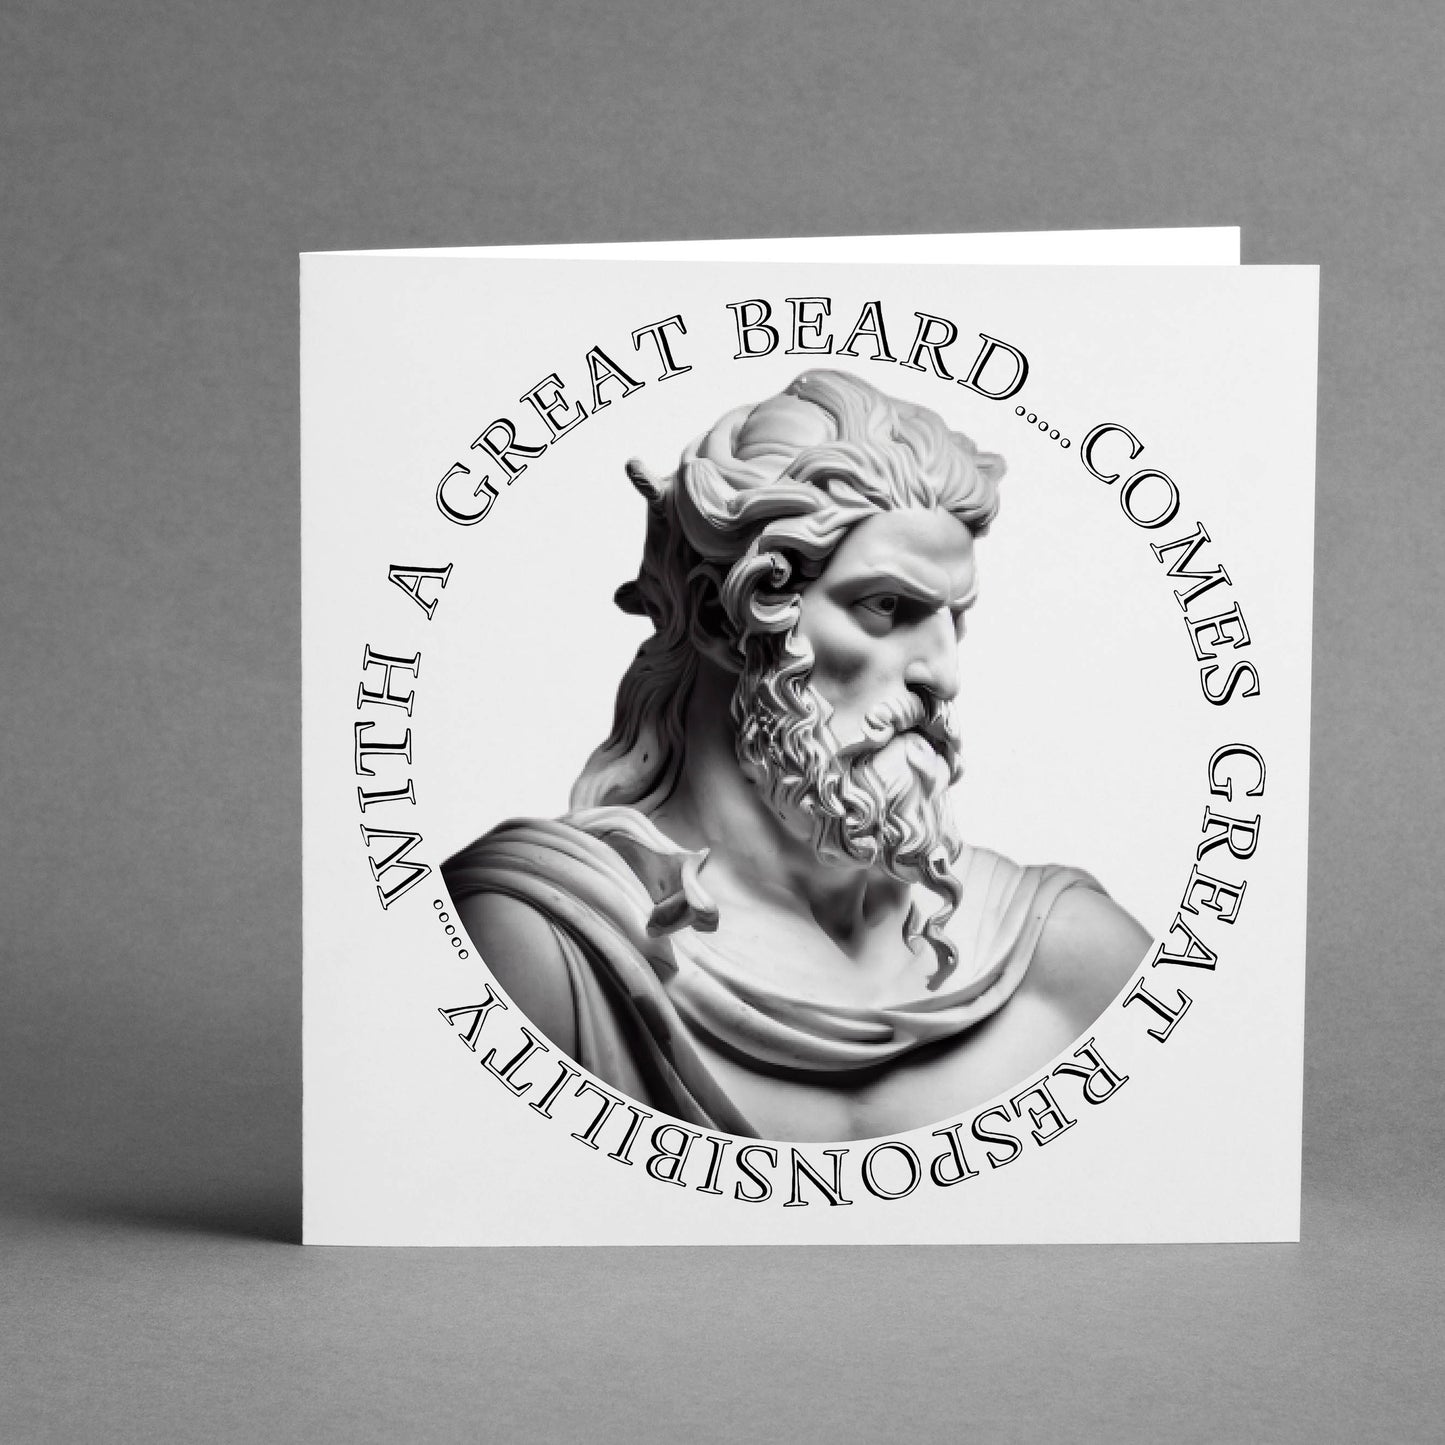 With a great beard comes great responsibility square card